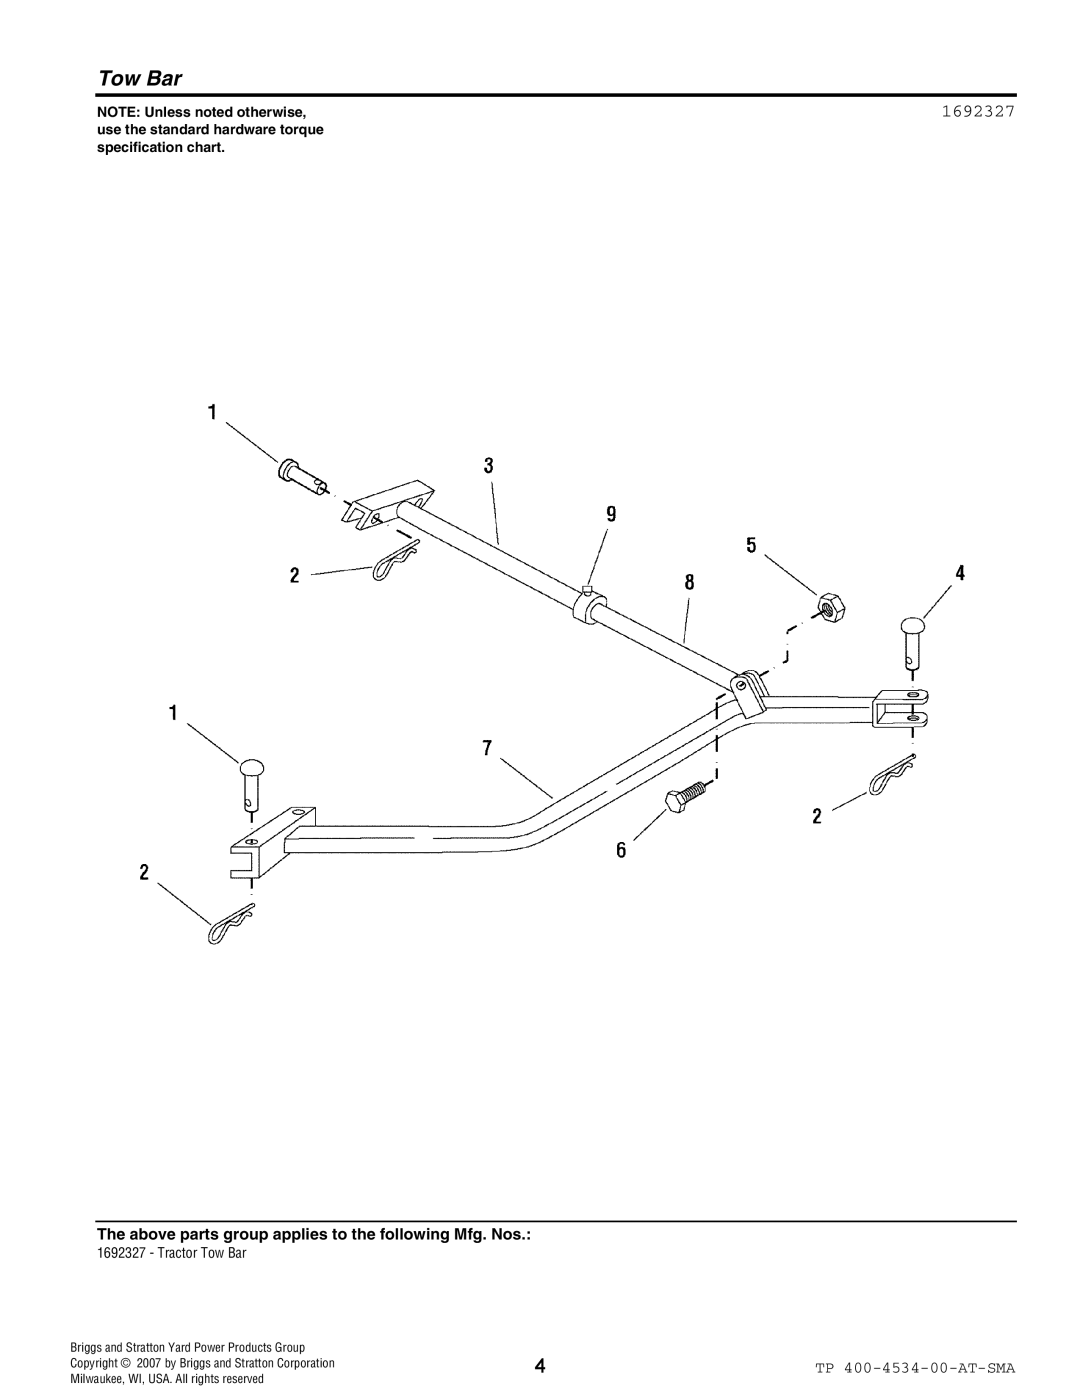 Snapper 4534 manual Tow Bar, 1692327, NOTE Unless noted otherwise, Briggs and Stratton Yard Power Products Group 